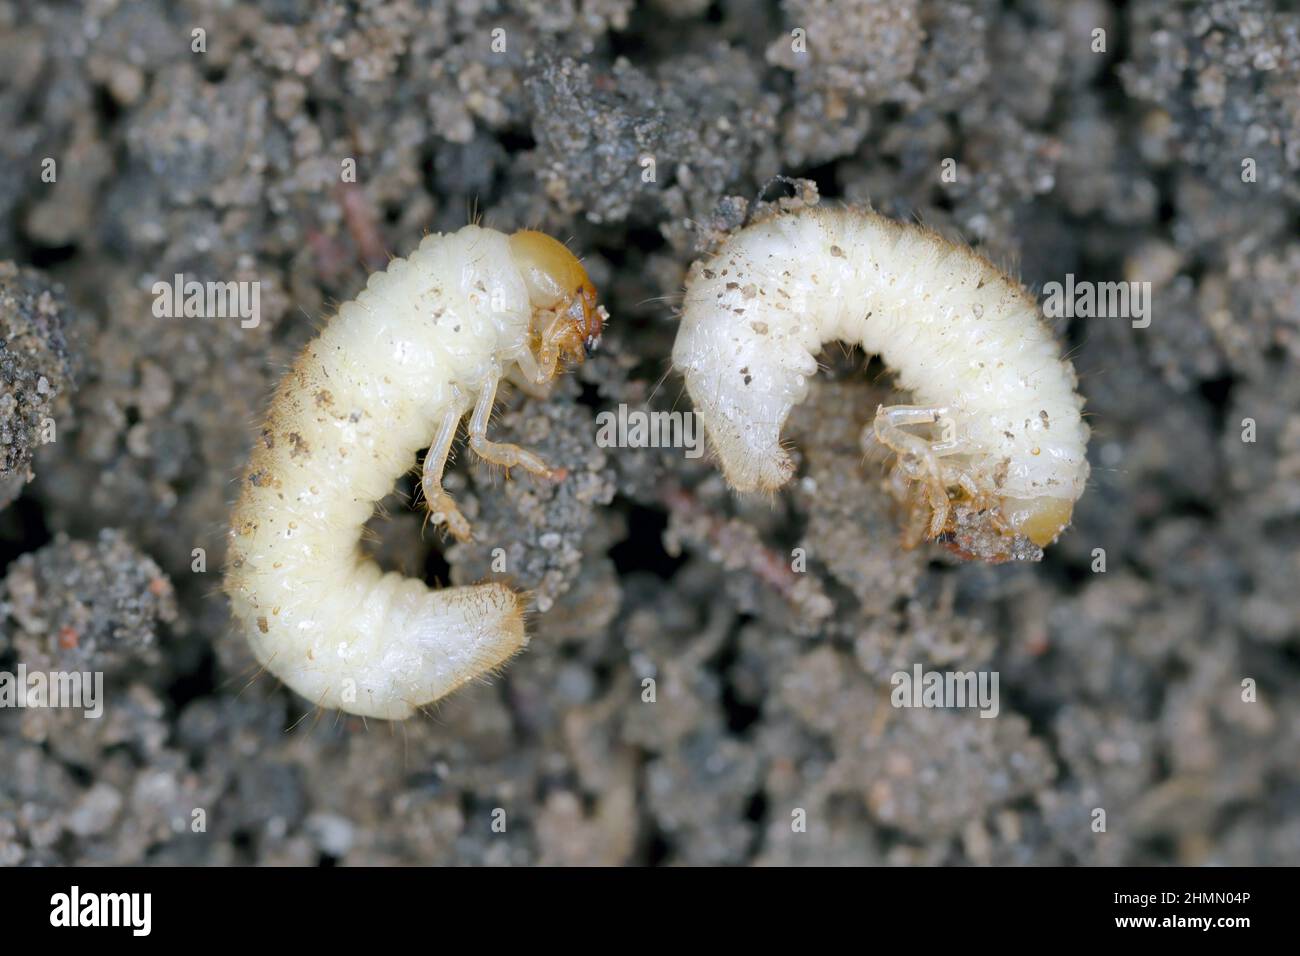 The larvae of the May beetle Common Cockchafer or May Bug (Melolontha melolontha). Grubs are important pest of plants. Stock Photo